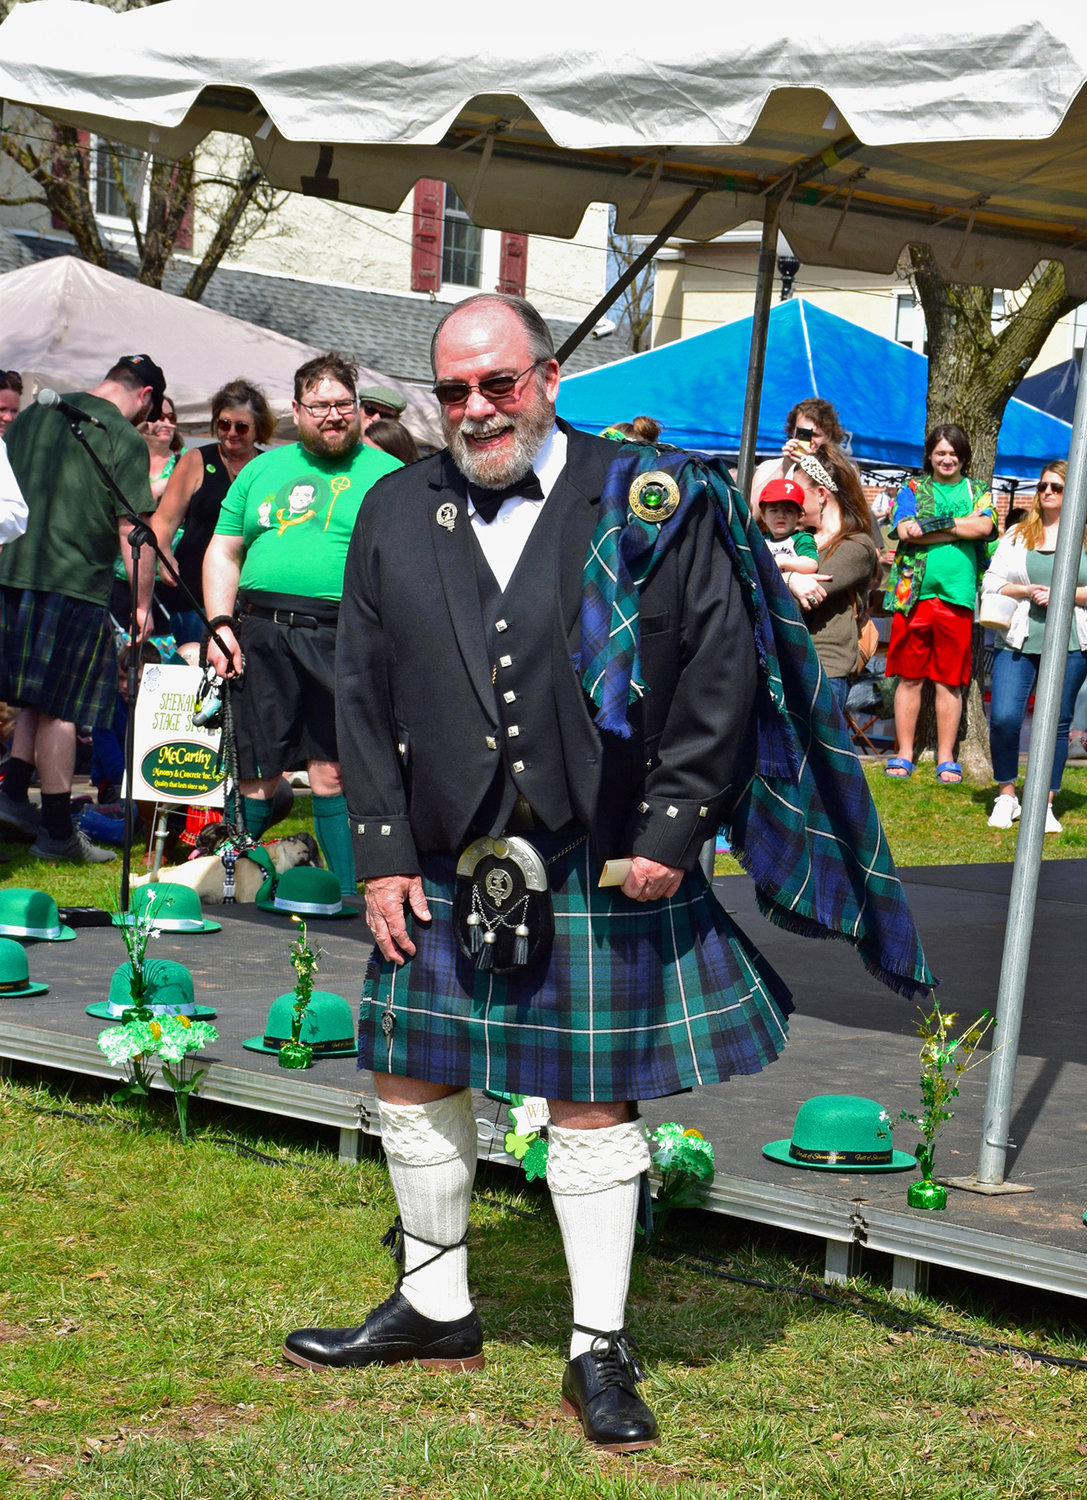 Robert Cormack of East Rockhill Township won Best Dressed in the kilt contest.